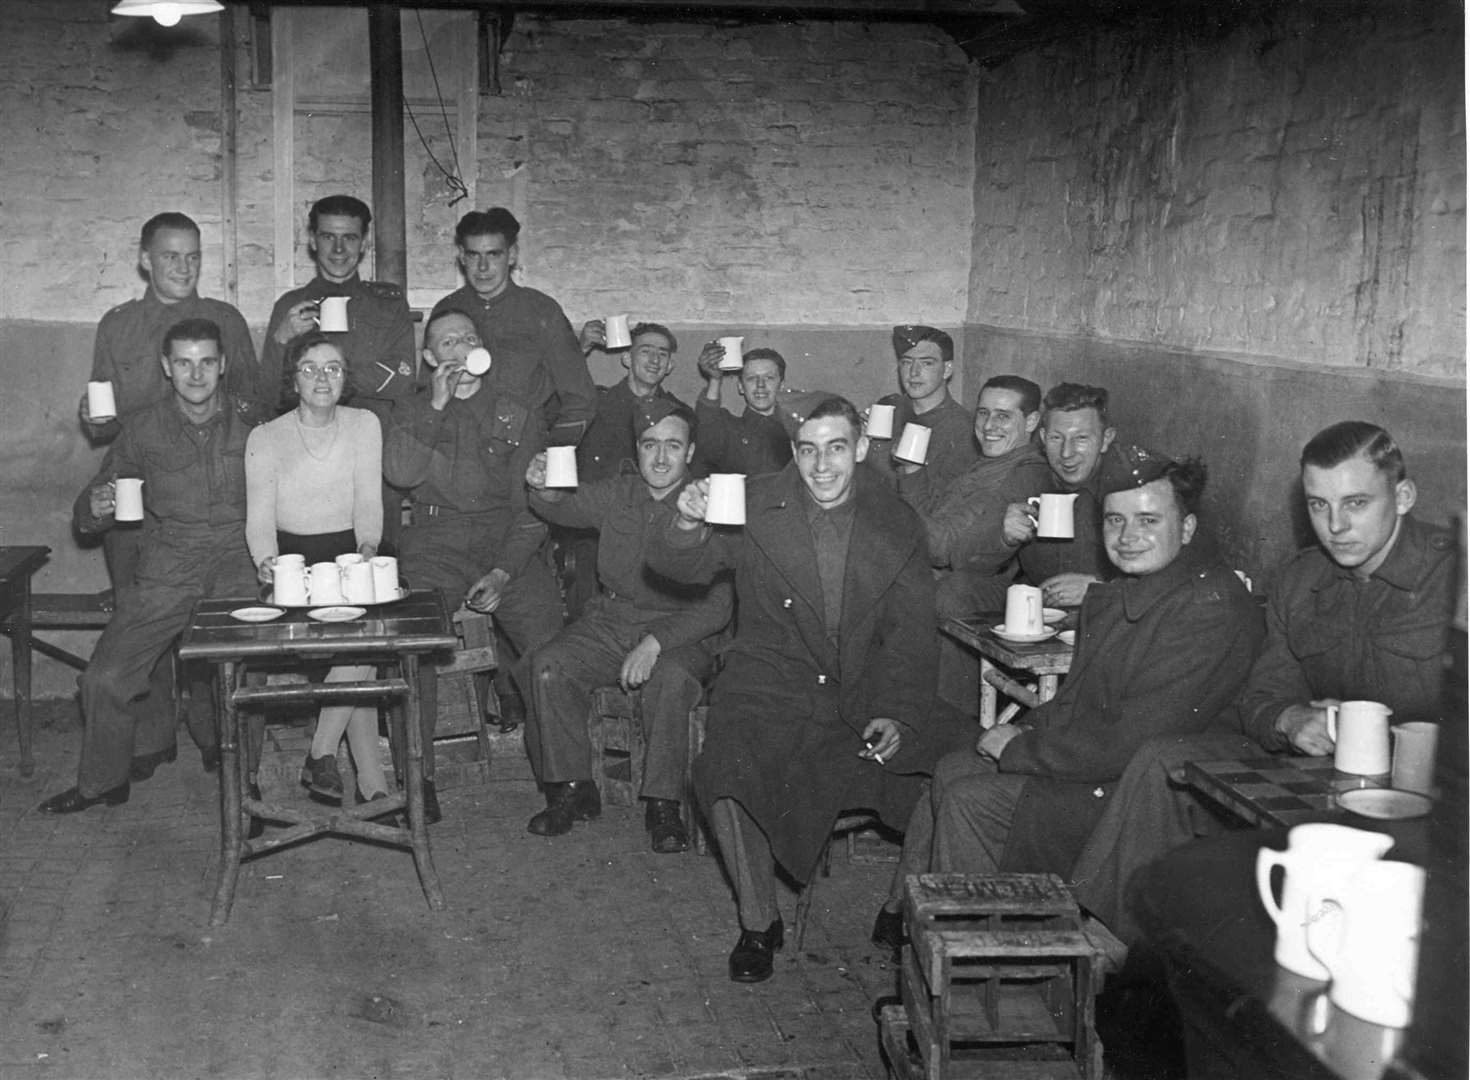 This picture was taken at one Christmas during the Second World War at The Valiant Sailor in Capel, near Folkestone, which was always open in defiance of Nazi shells